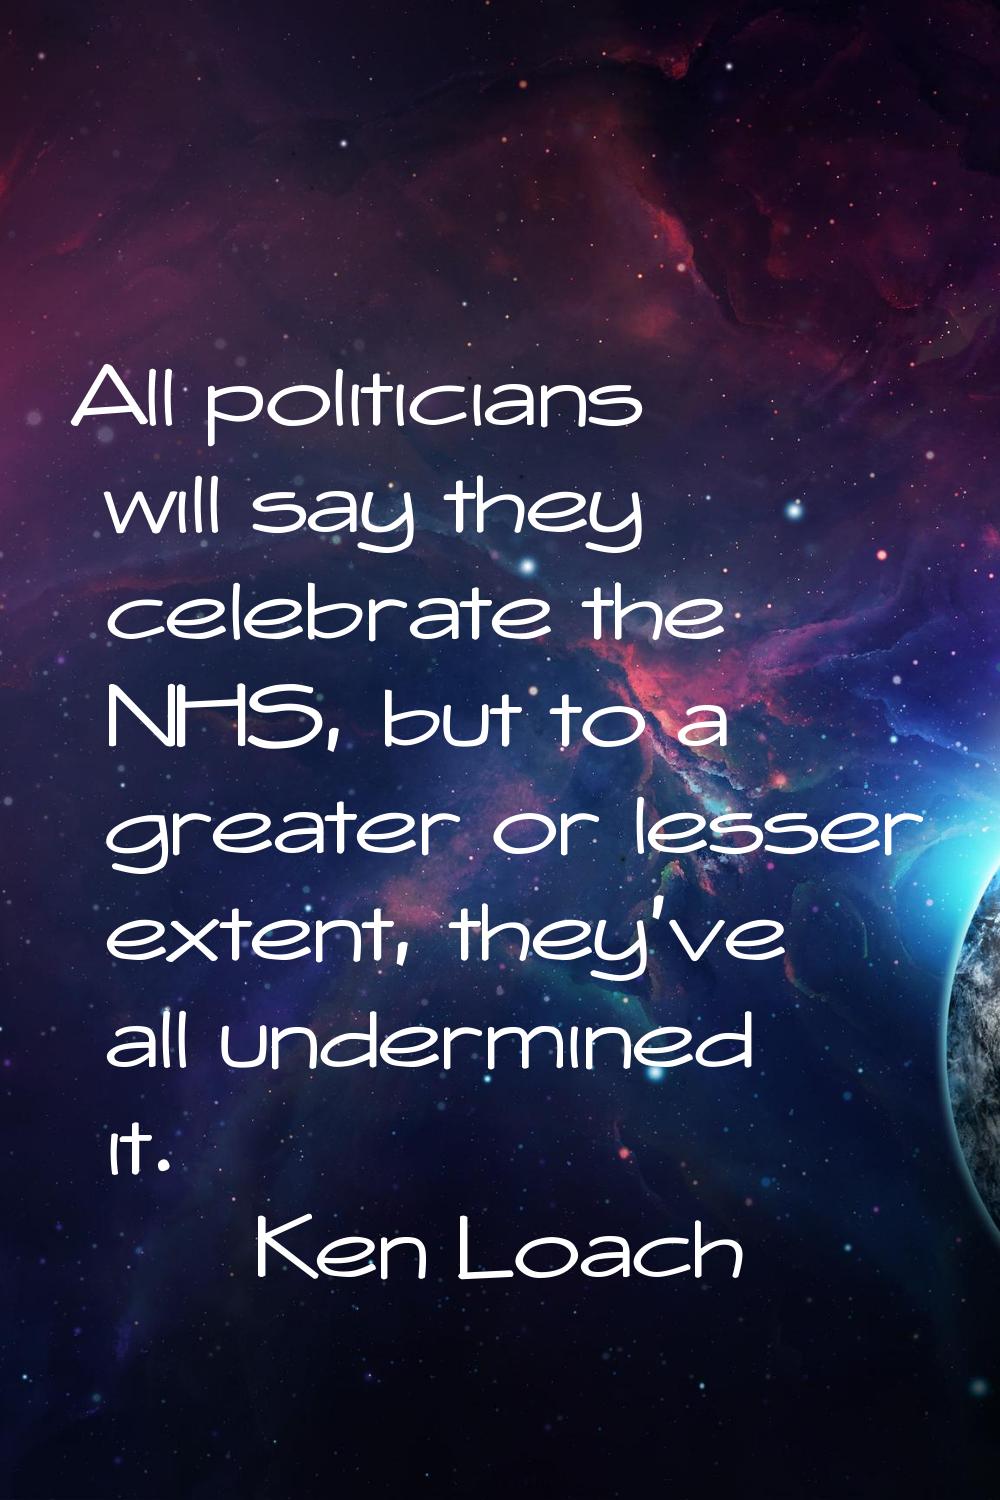 All politicians will say they celebrate the NHS, but to a greater or lesser extent, they've all und